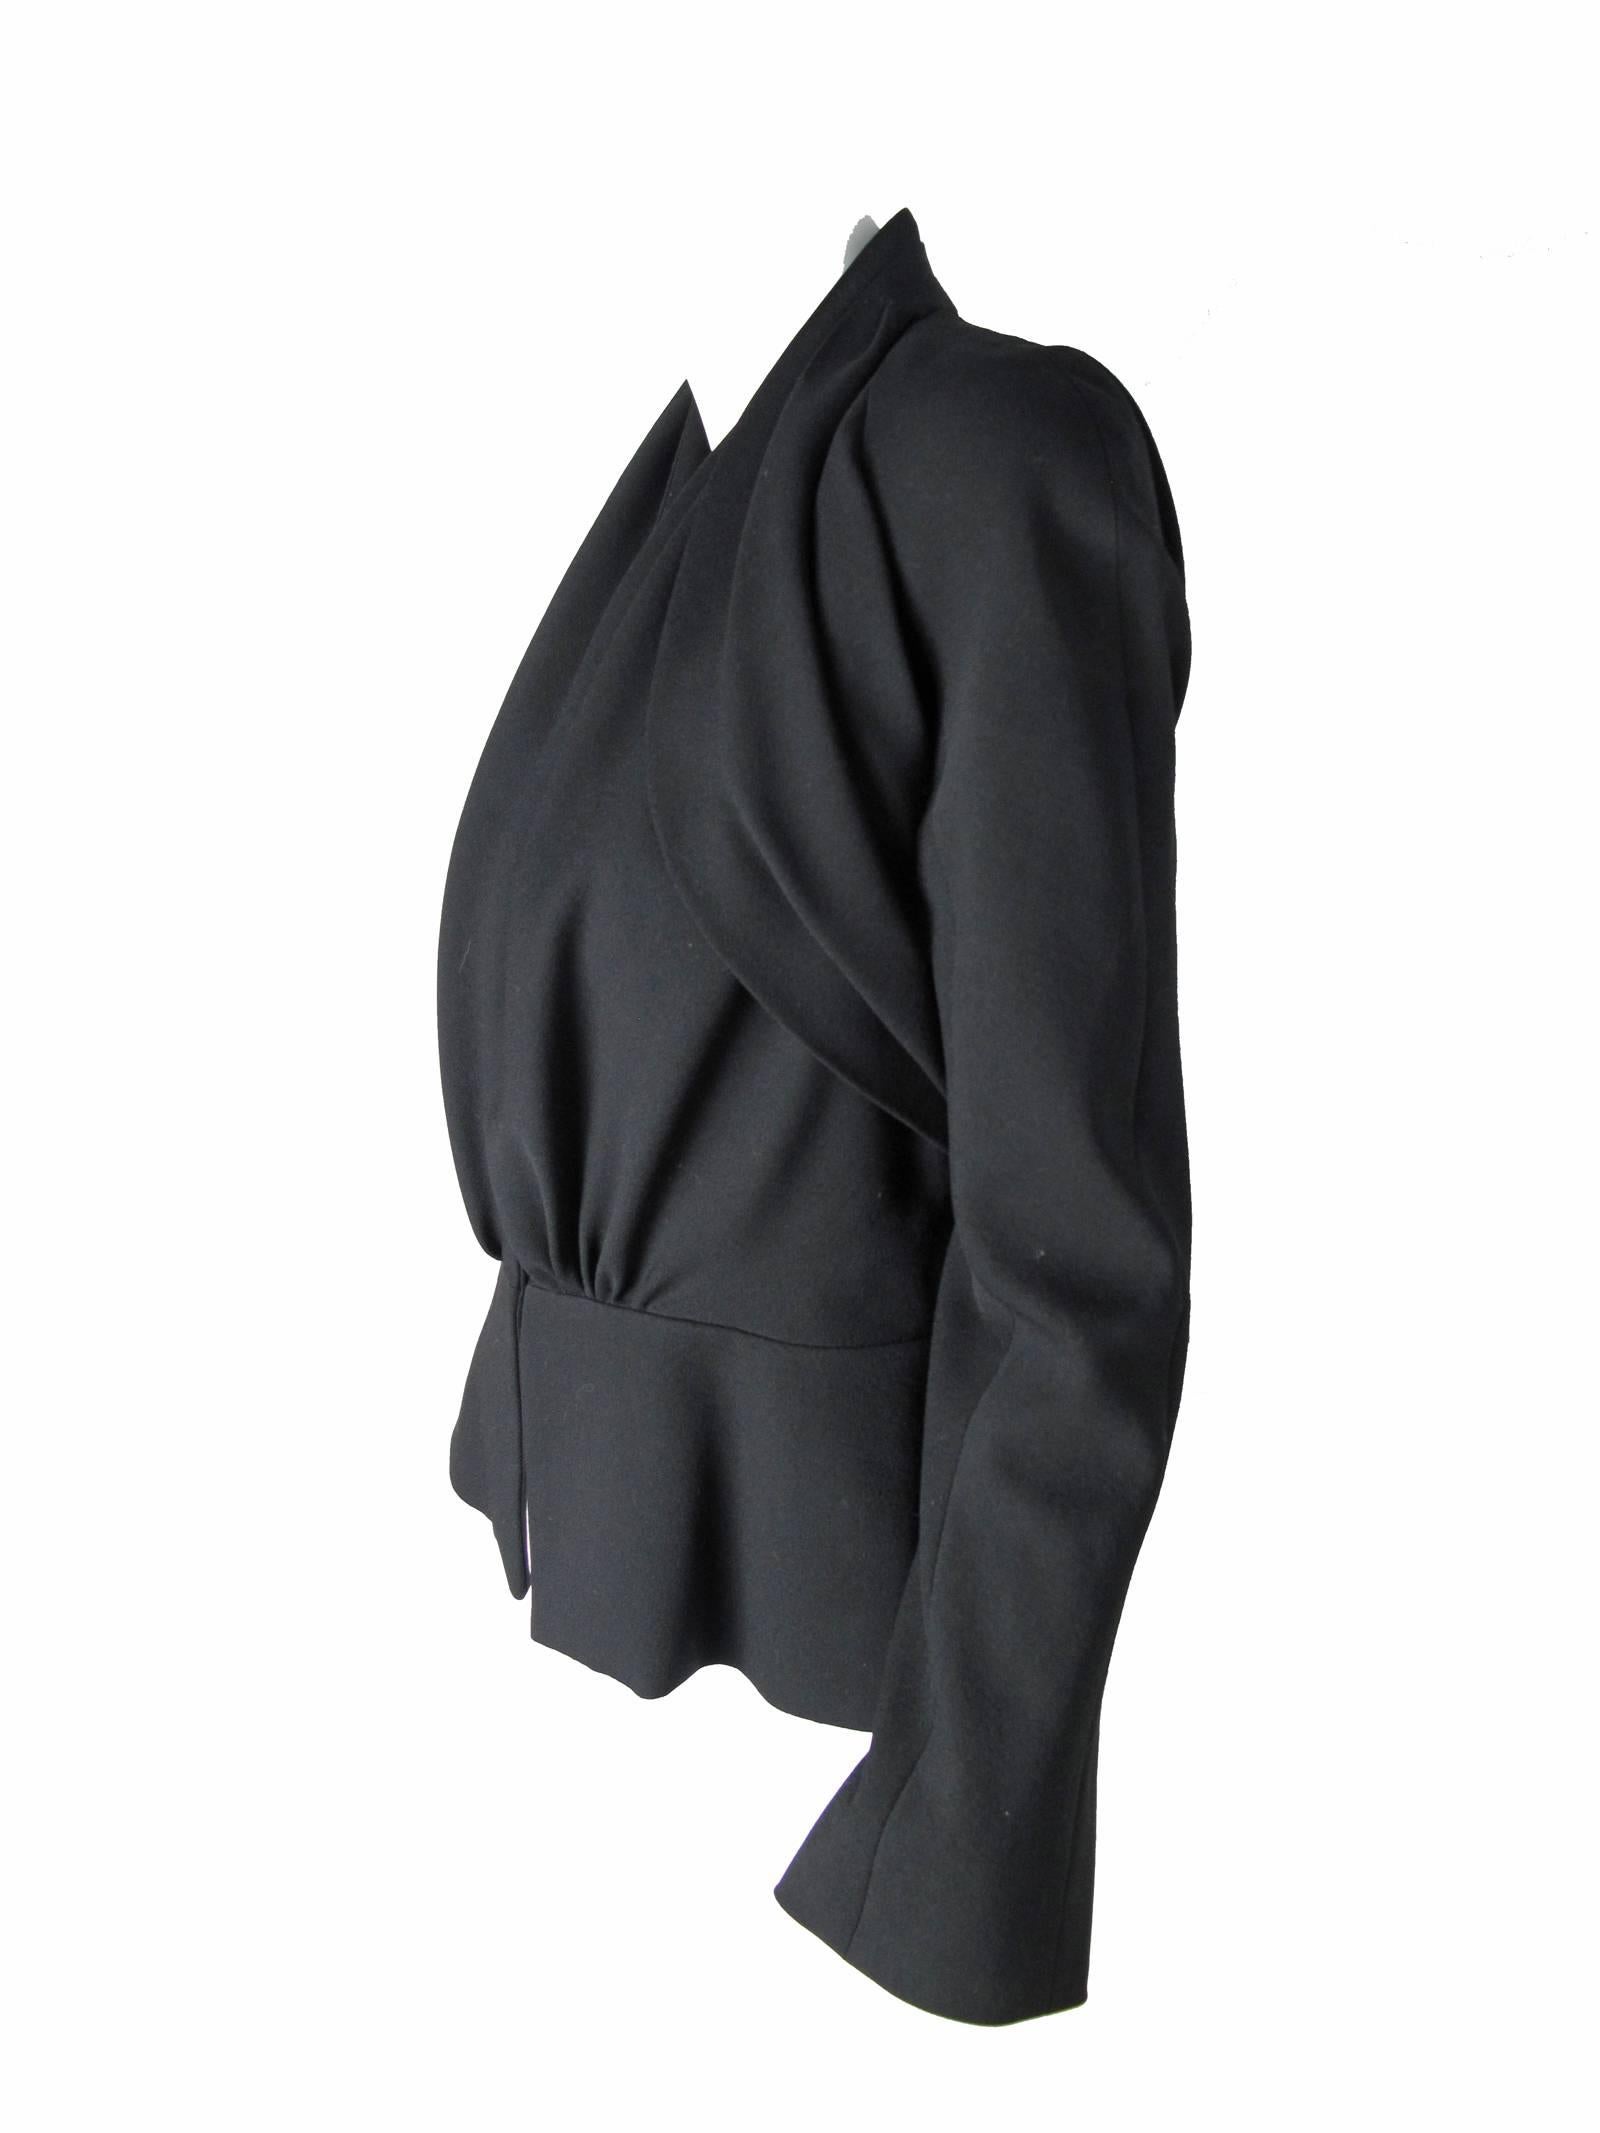 Christian Dior black wool 40s inspired jacket with pleating on shoulders. Snaps to  close.  34